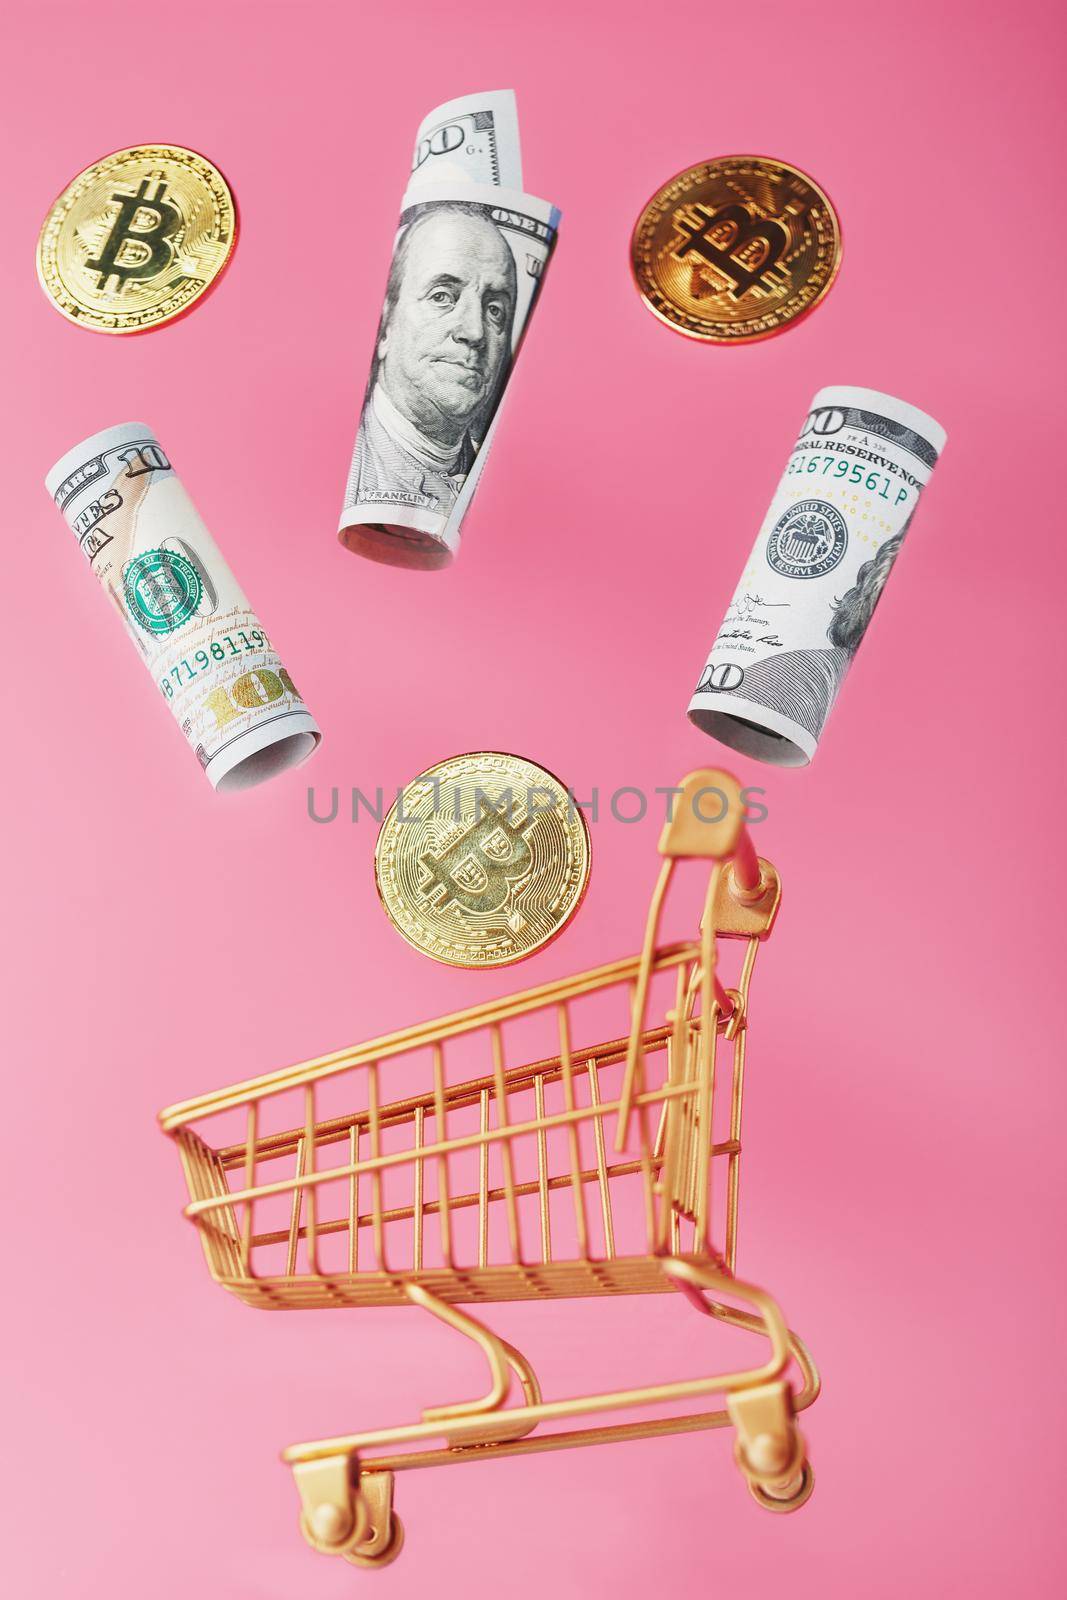 Dollar bills and itkon coins flew out of the Golden Basket on a pink background. Concept businesses, finance, trading, or stock exchange investments